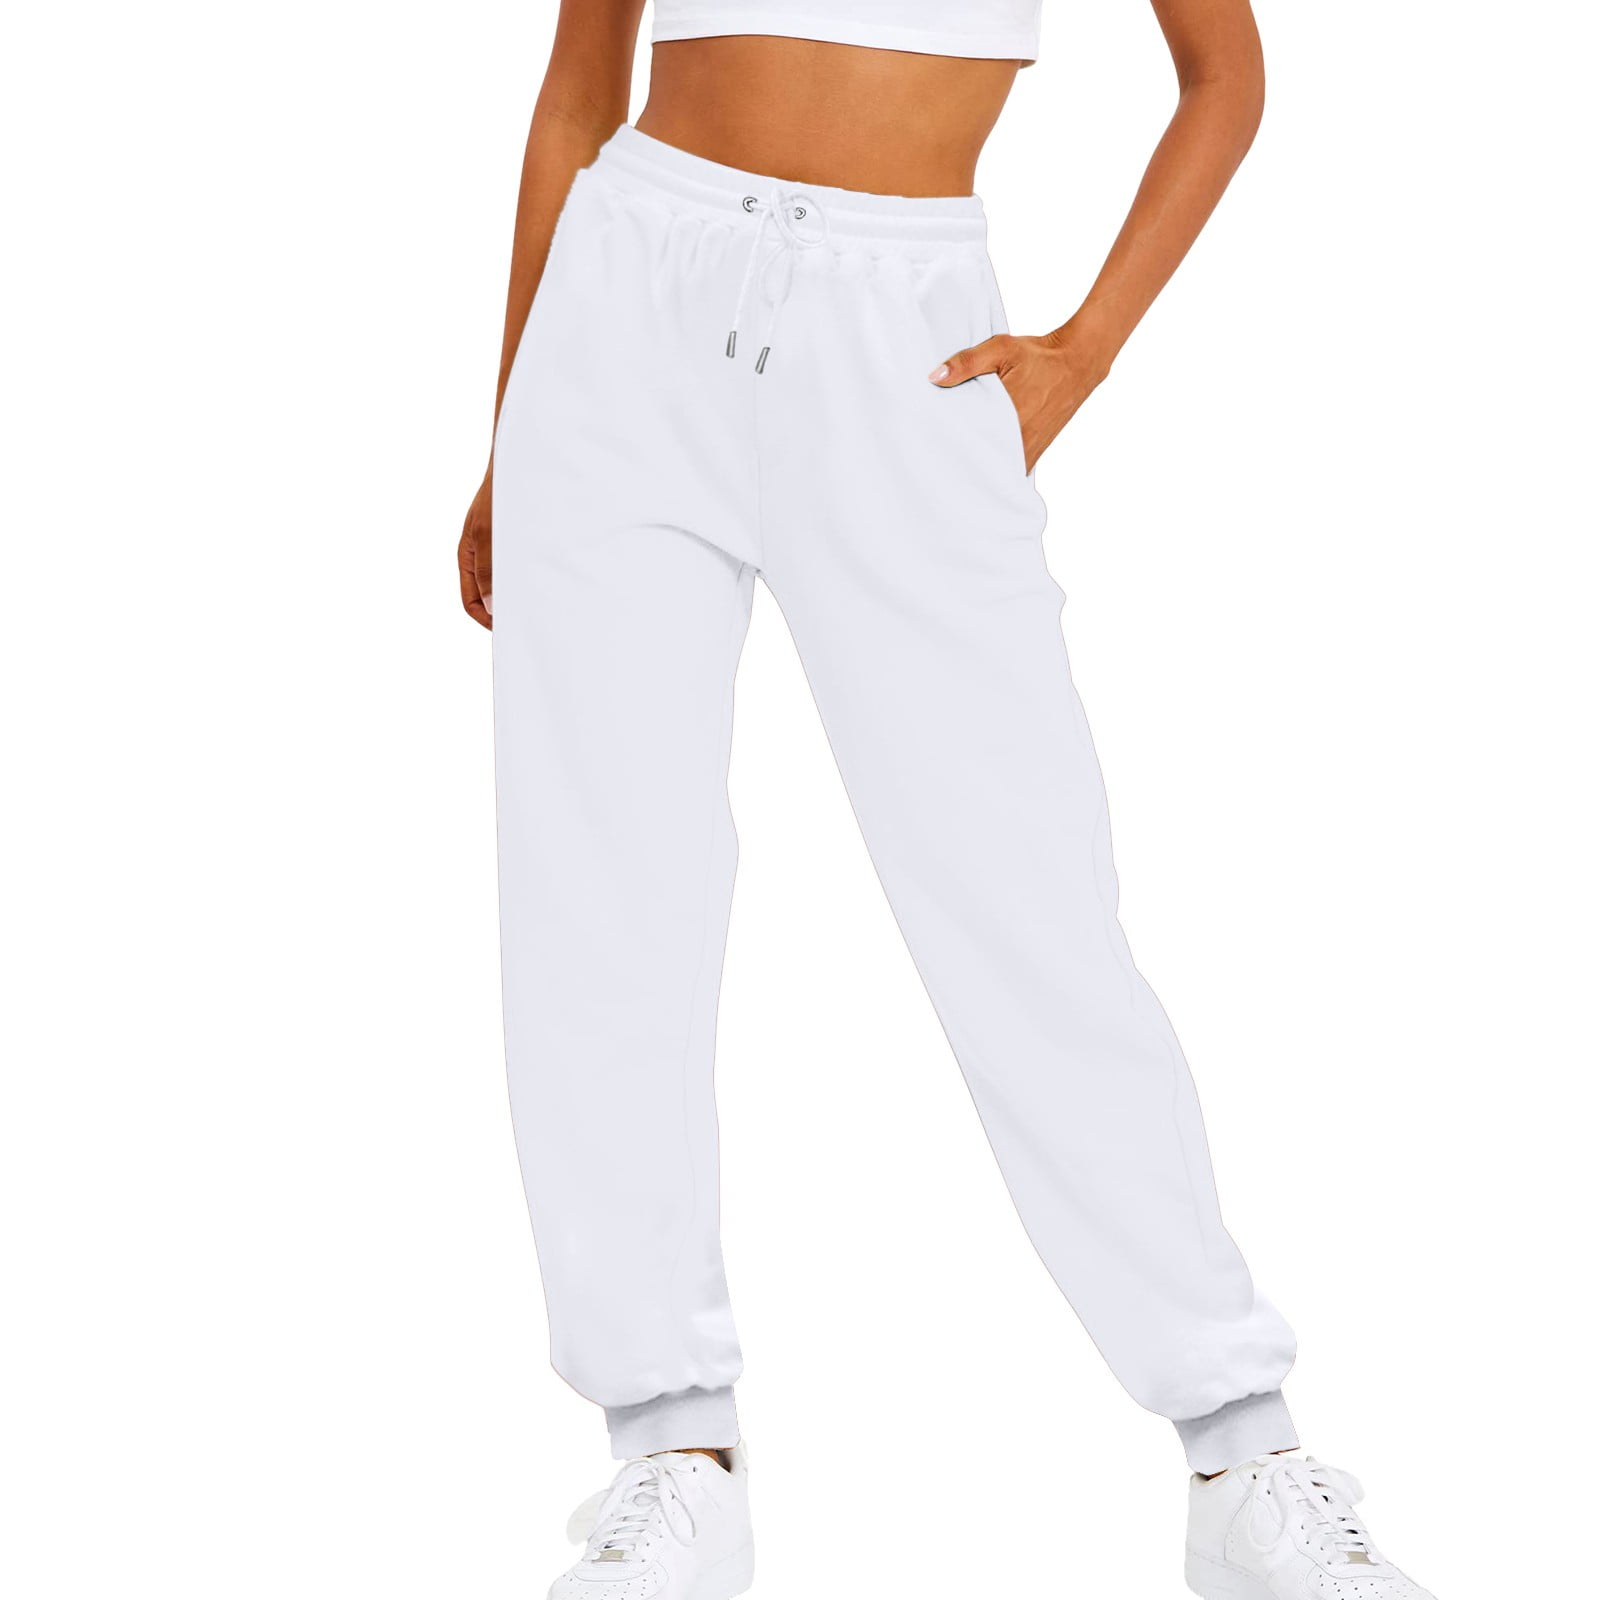 Ydkzymd Lounge Stacked Sweatpants Women for Workout with Pockets Women  Pants Casual Sport Solid Color Trousers High Waist Casual Jogging  Drawstring